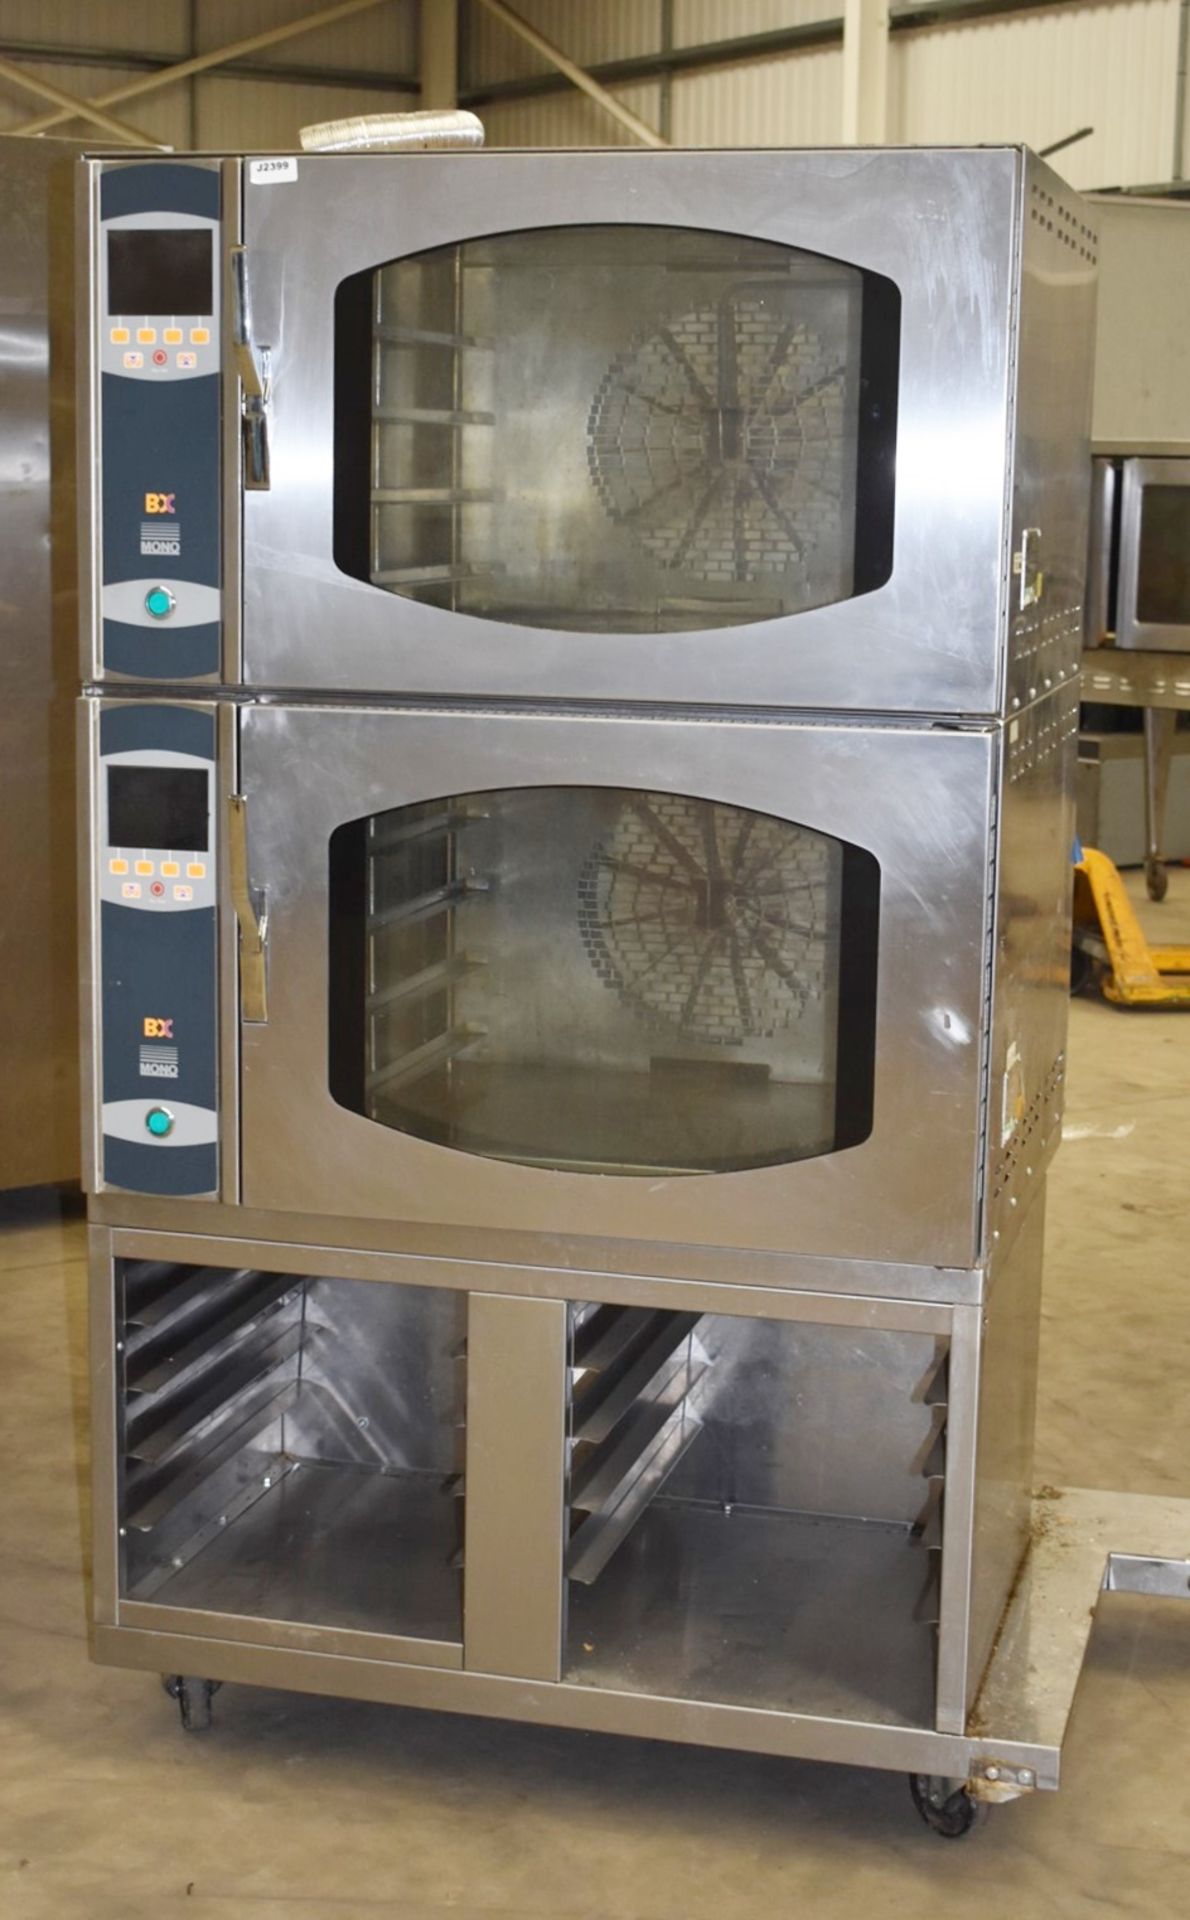 1 x Mono FG158 Double Commercial Bakery Convection Oven - 3 Phase - Ex M&S - H180 x W100 x D85 cms - - Image 5 of 10